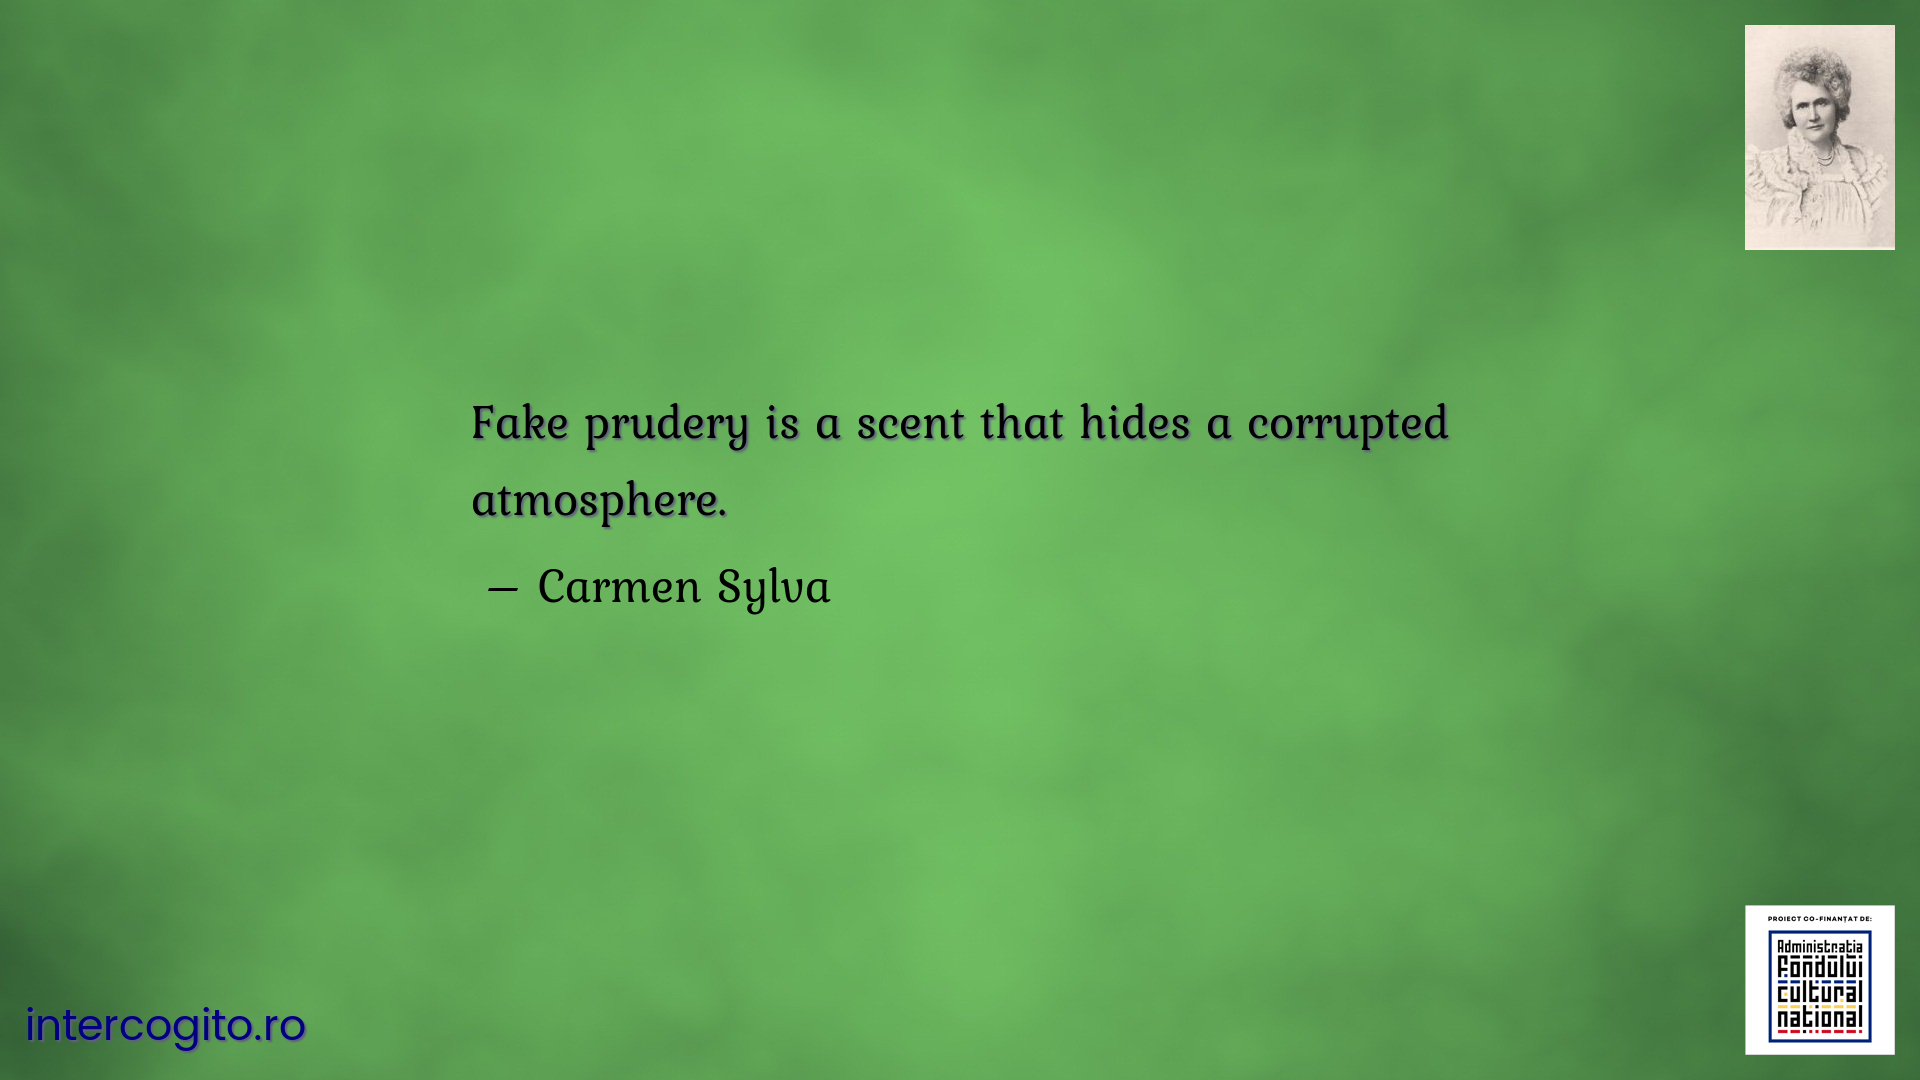 Fake prudery is a scent that hides a corrupted atmosphere.